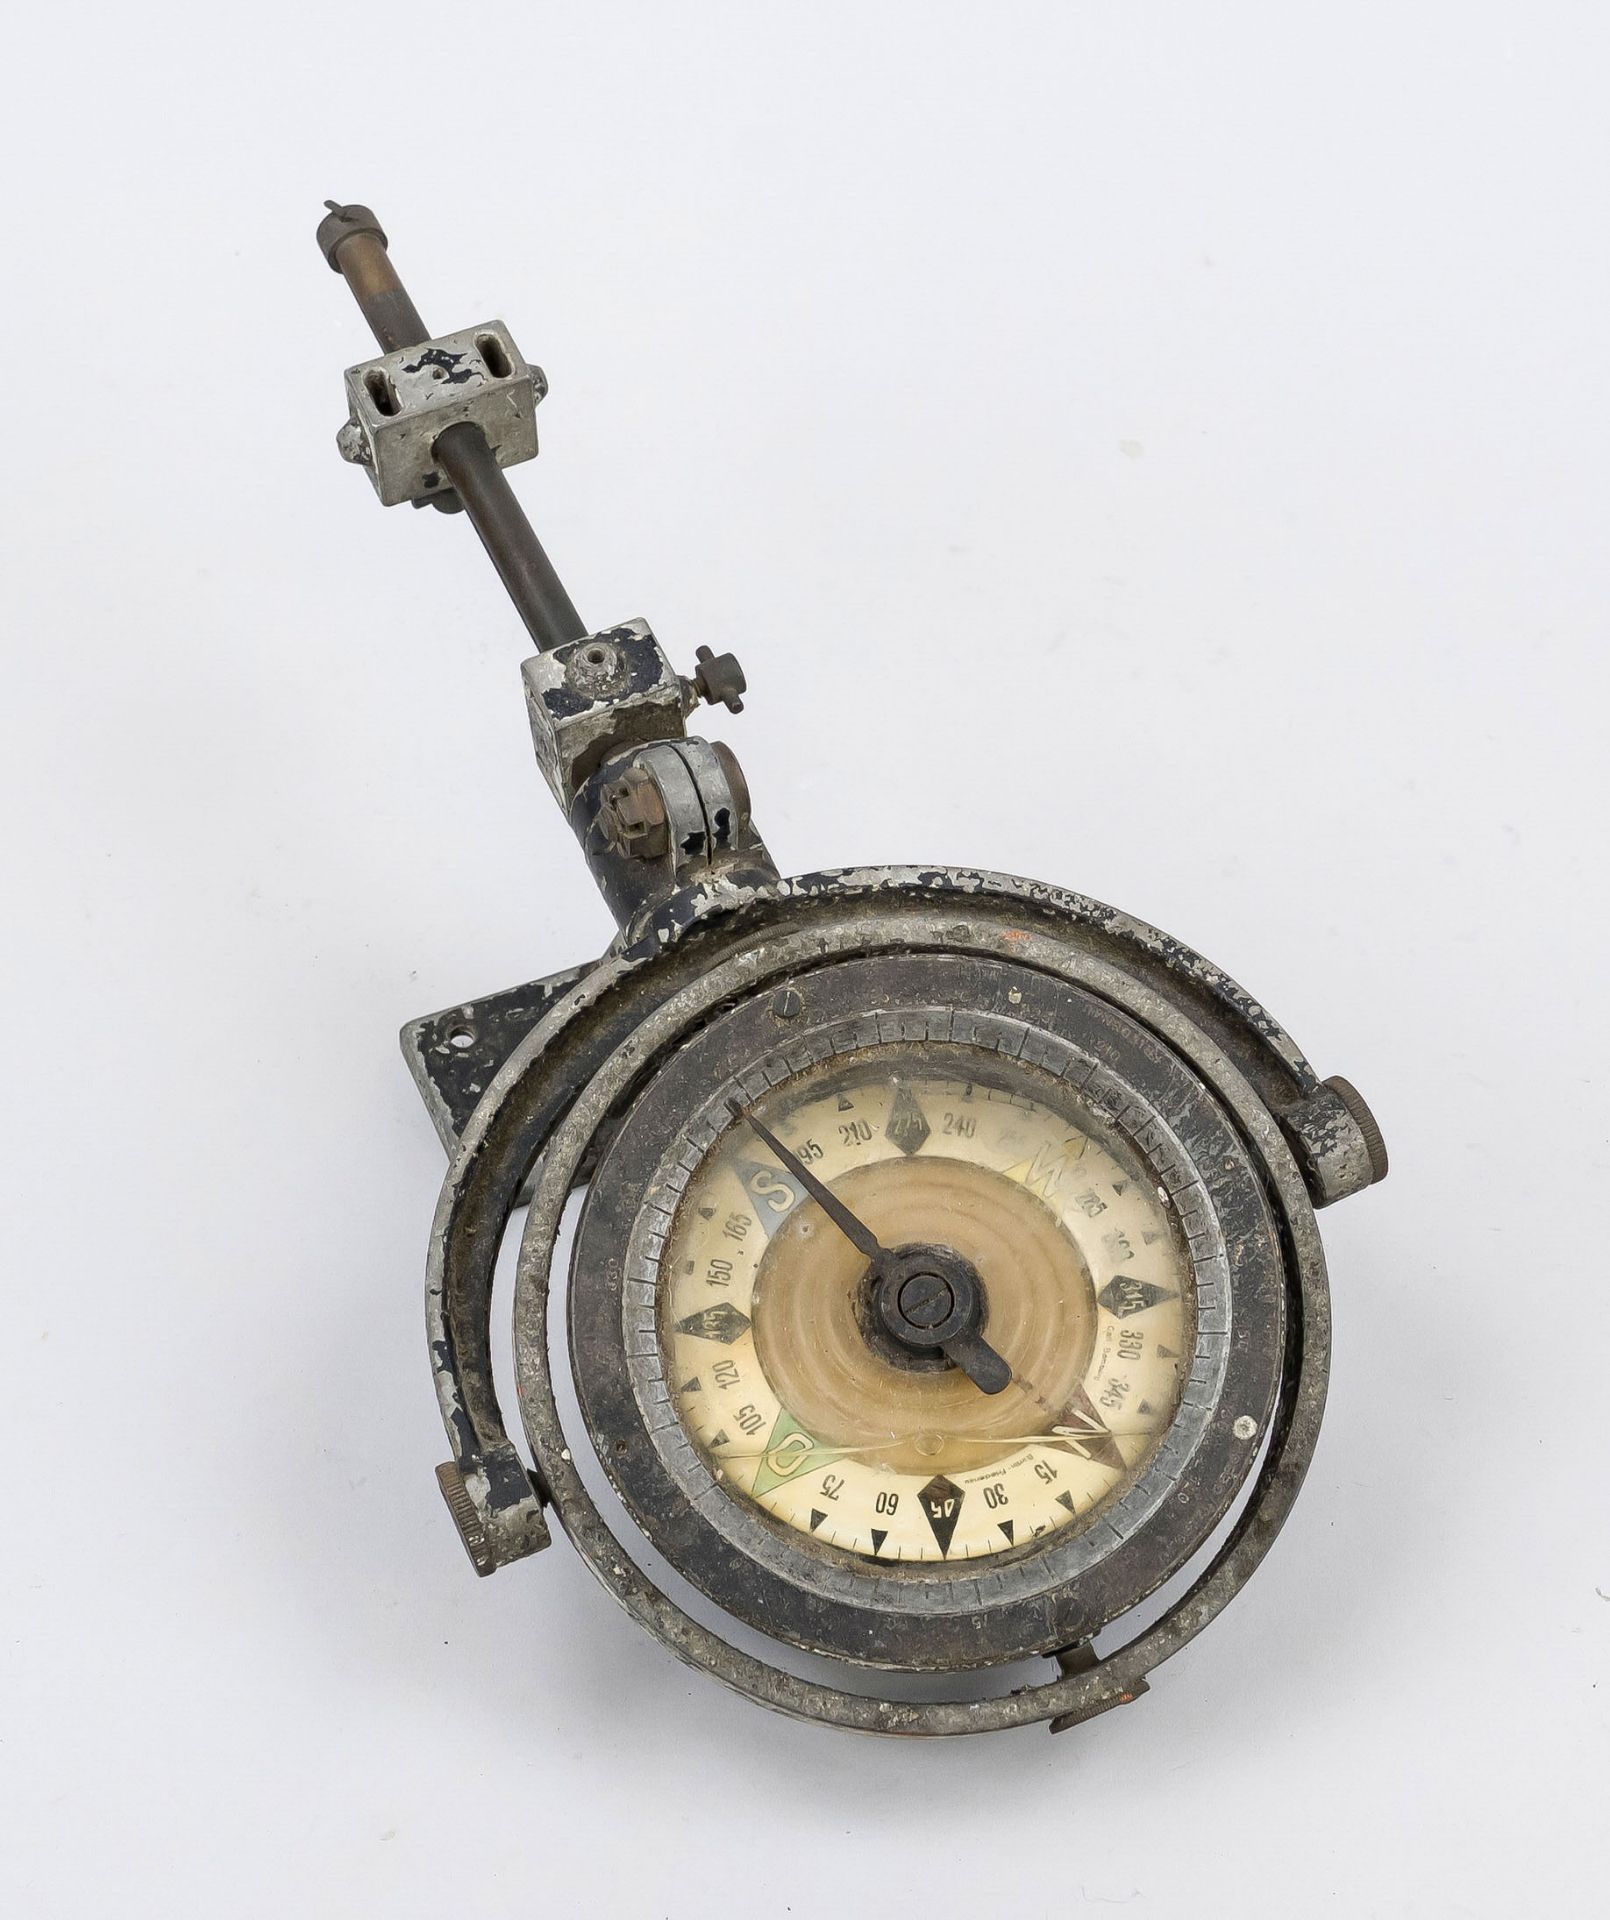 Compass for airplane or zeppelin, around 1920, white metal. Fuselage compass, with cardanic